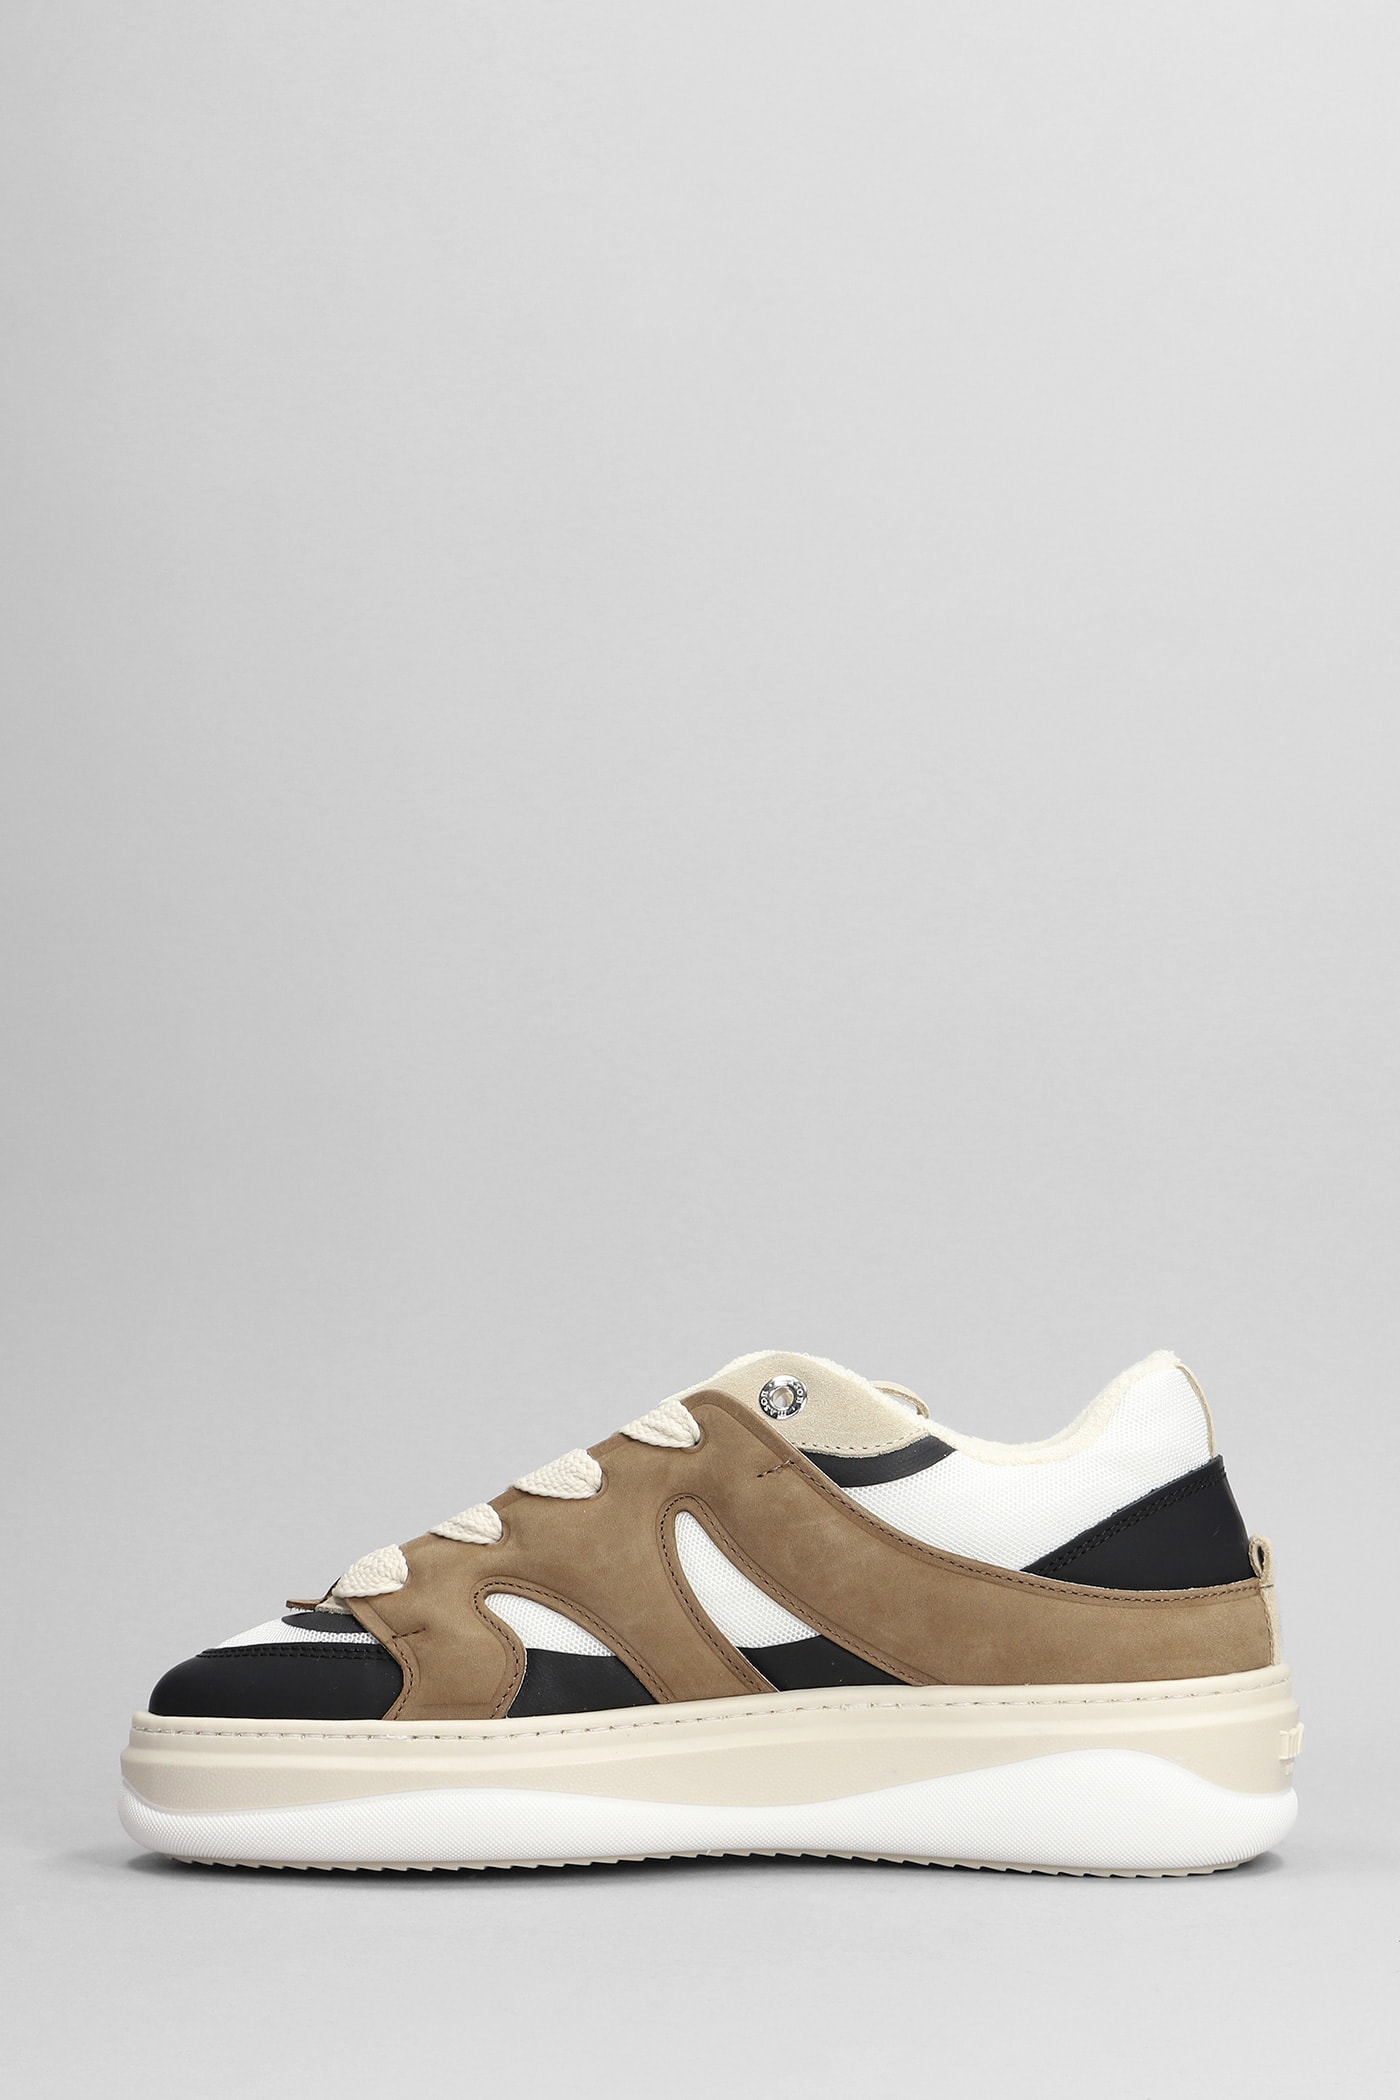 Shop Mason Garments Venice Sneakers In Brown Suede And Fabric